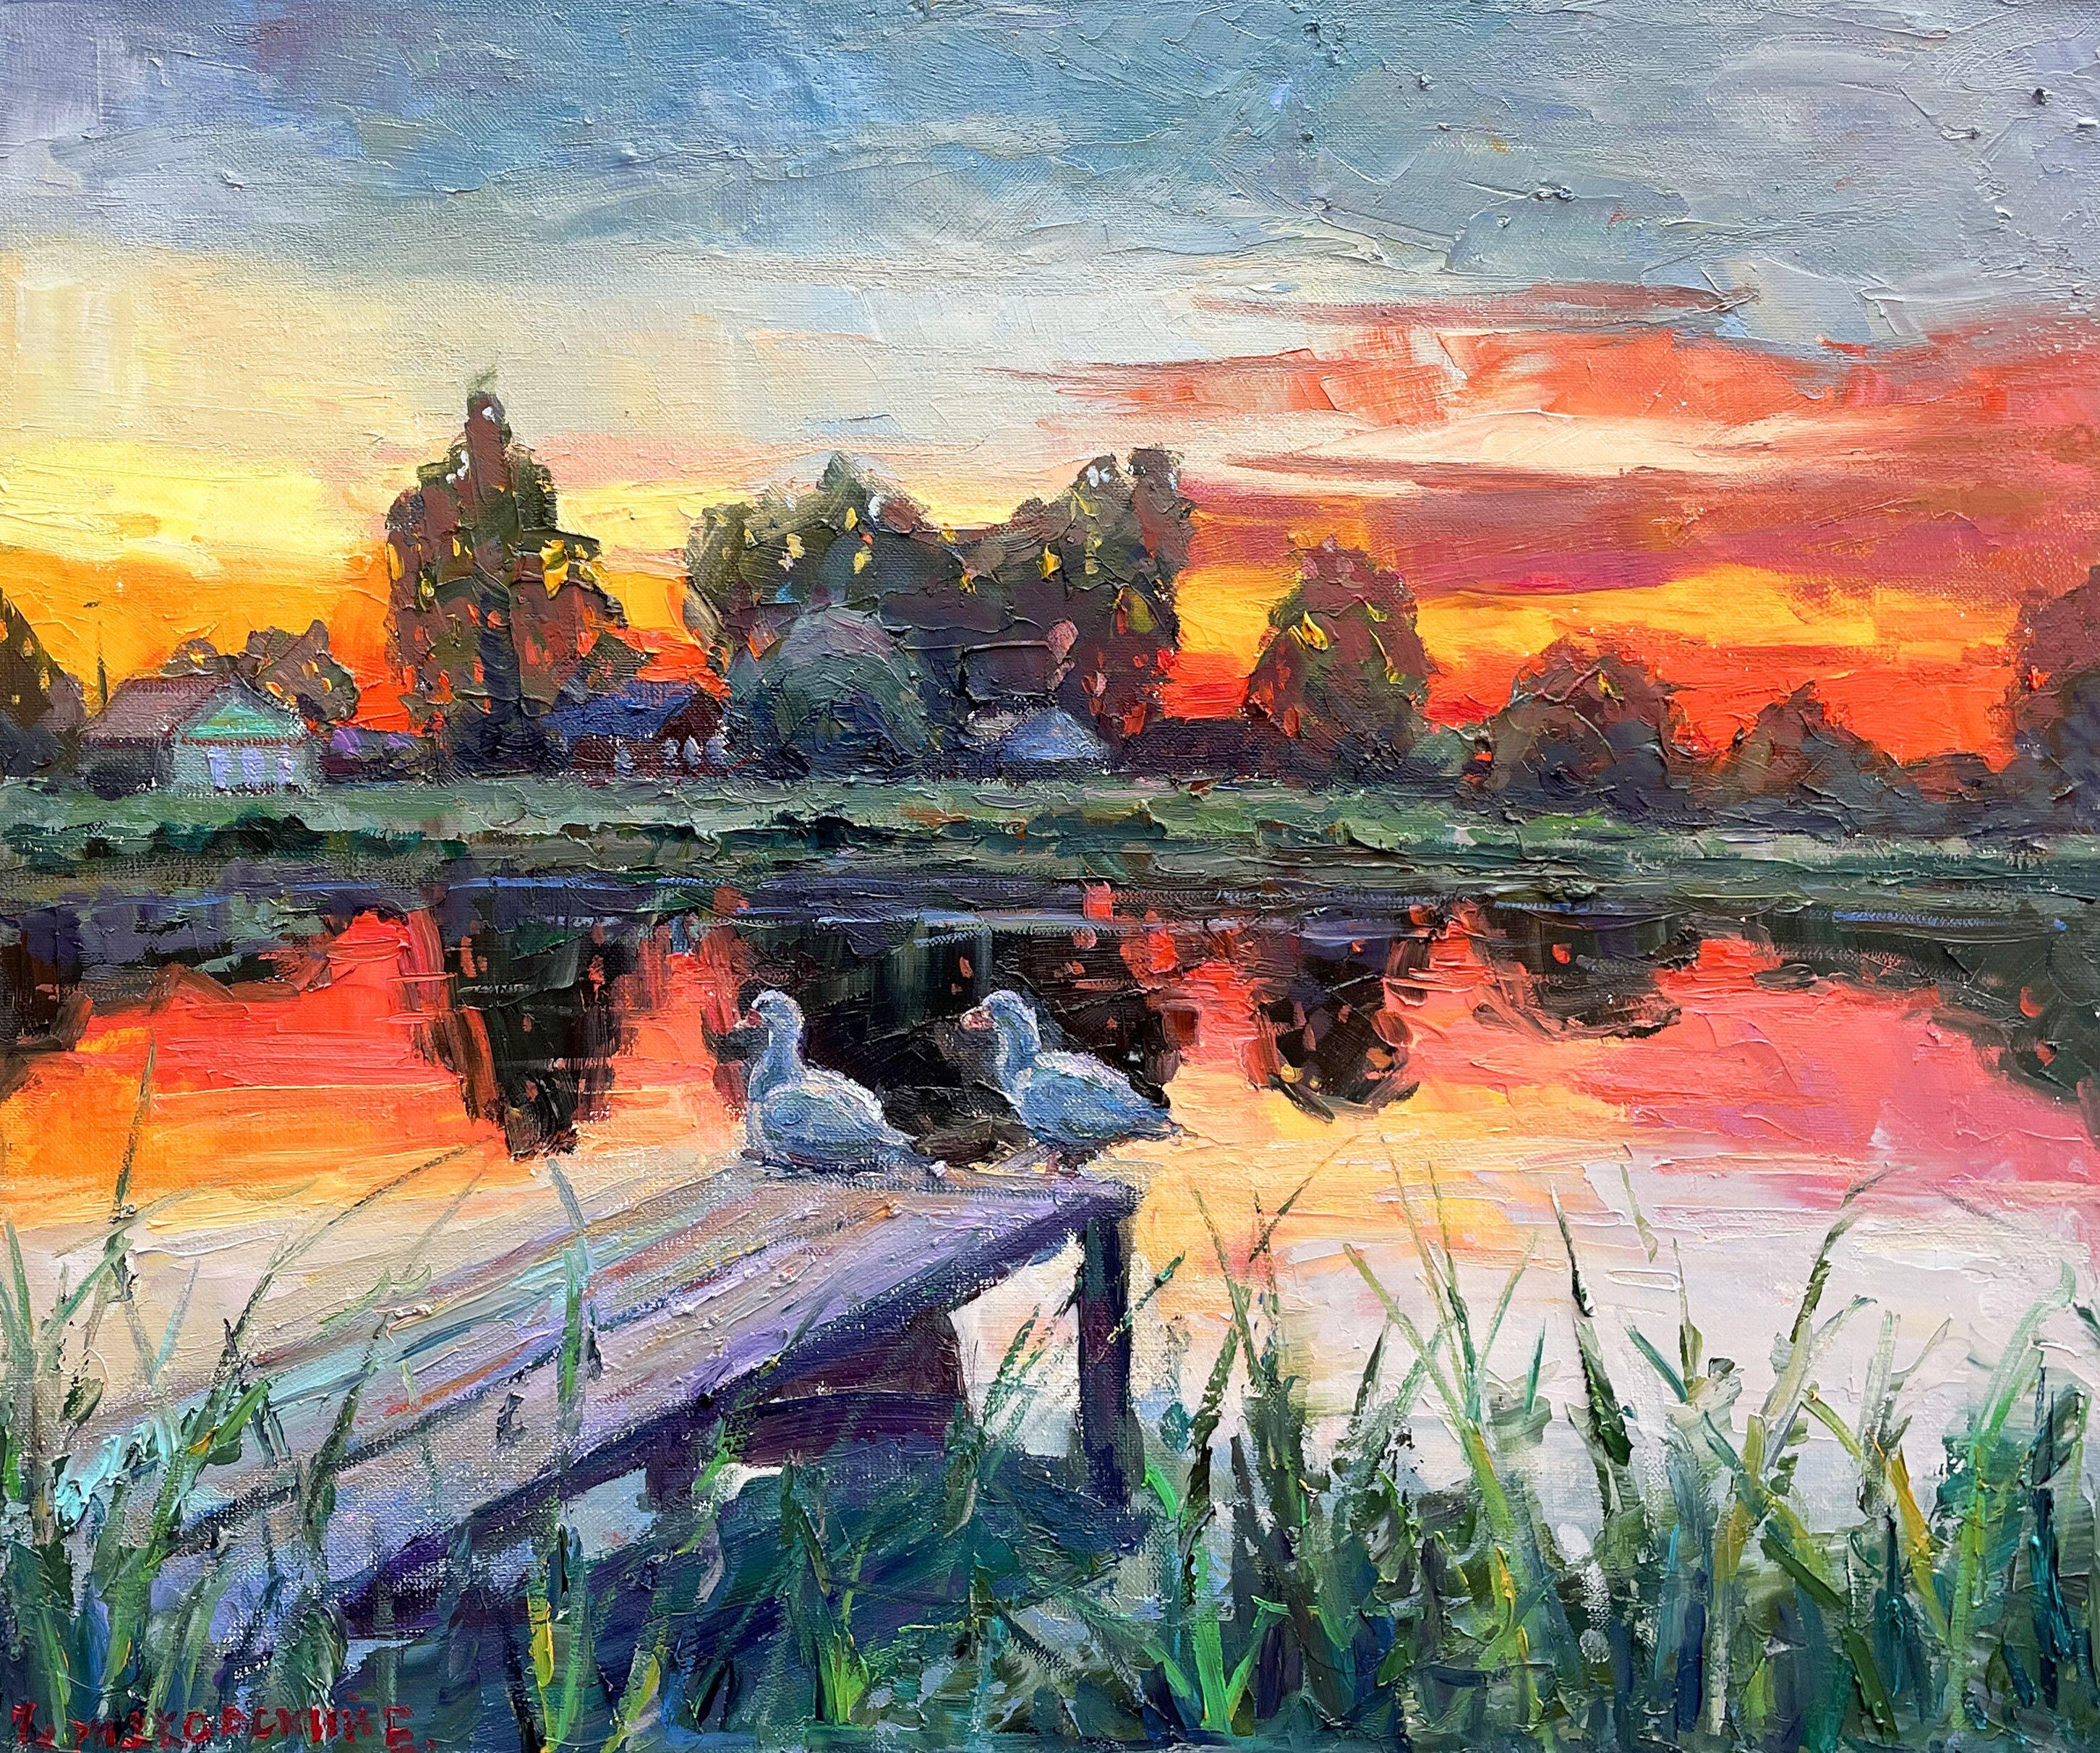 Original Oil painting by Ukrainian artist Evgeny Chernyakovsky "River" 50.0 X 60.0 CM / 19.6 X 23.6 IN HIGH QUALITY oil on canvas Signed on the front and back Dated 2023 Good condition GUARANTEE OF AUTHENTICITY :: Painting :: Impressionist :: This